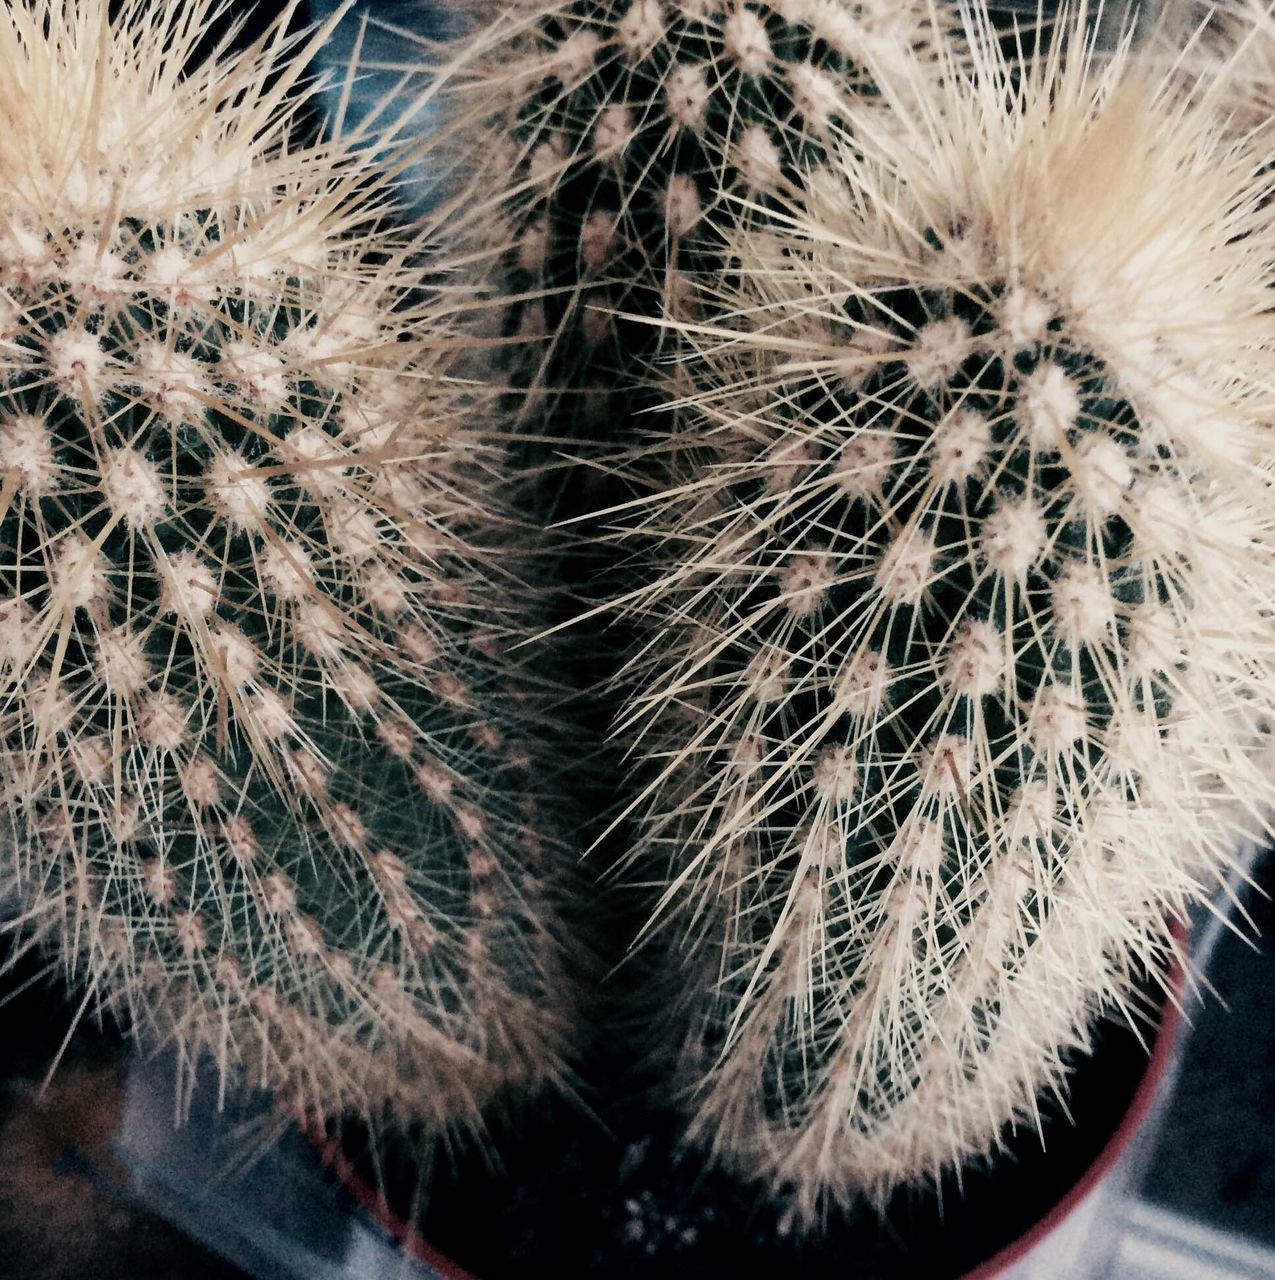 growth, nature, plant, close-up, no people, sharp, spiked, beauty in nature, fragility, outdoors, day, cactus, needle - plant part